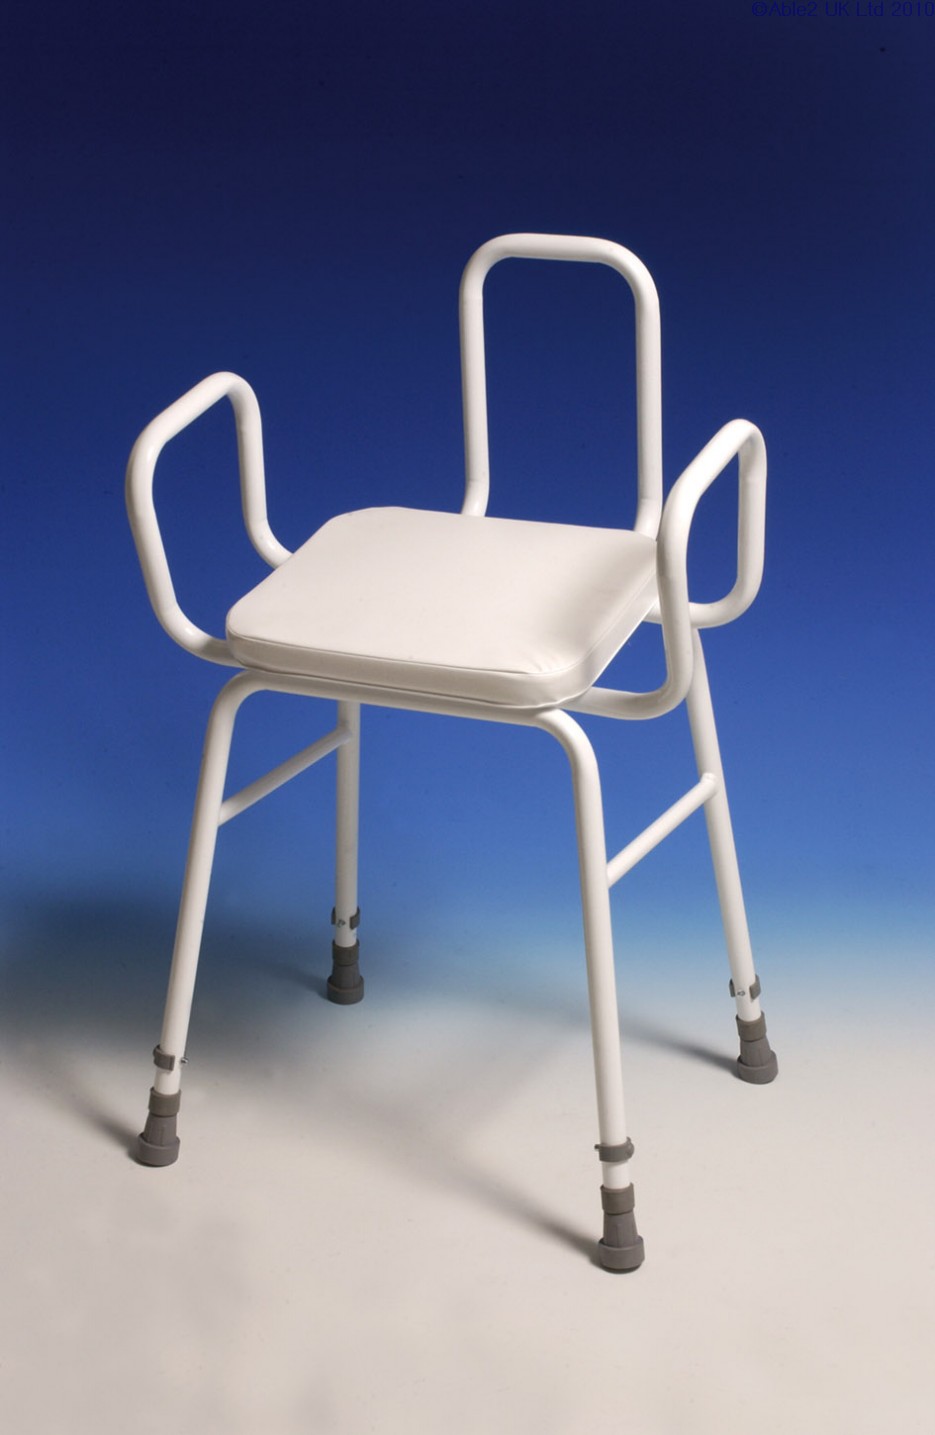 Perching Stool - adj height with arms and back